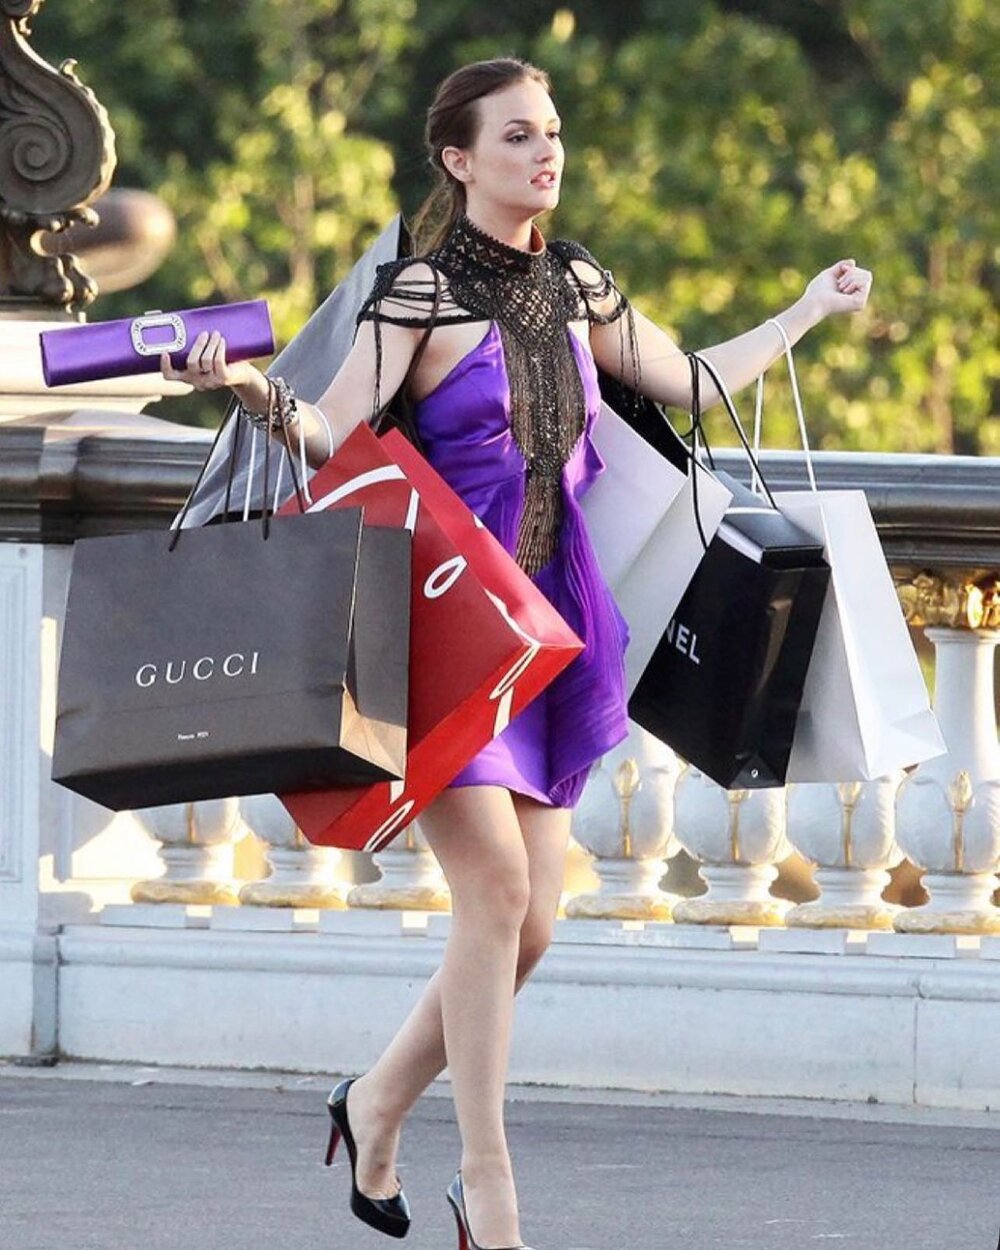 As Blair Waldorf once said, &ldquo;whoever said money doesn&rsquo;t buy happiness doesn&rsquo;t know where to shop.&rdquo; Comment below and let us know your favorite place to shop #MakingitinManhattan